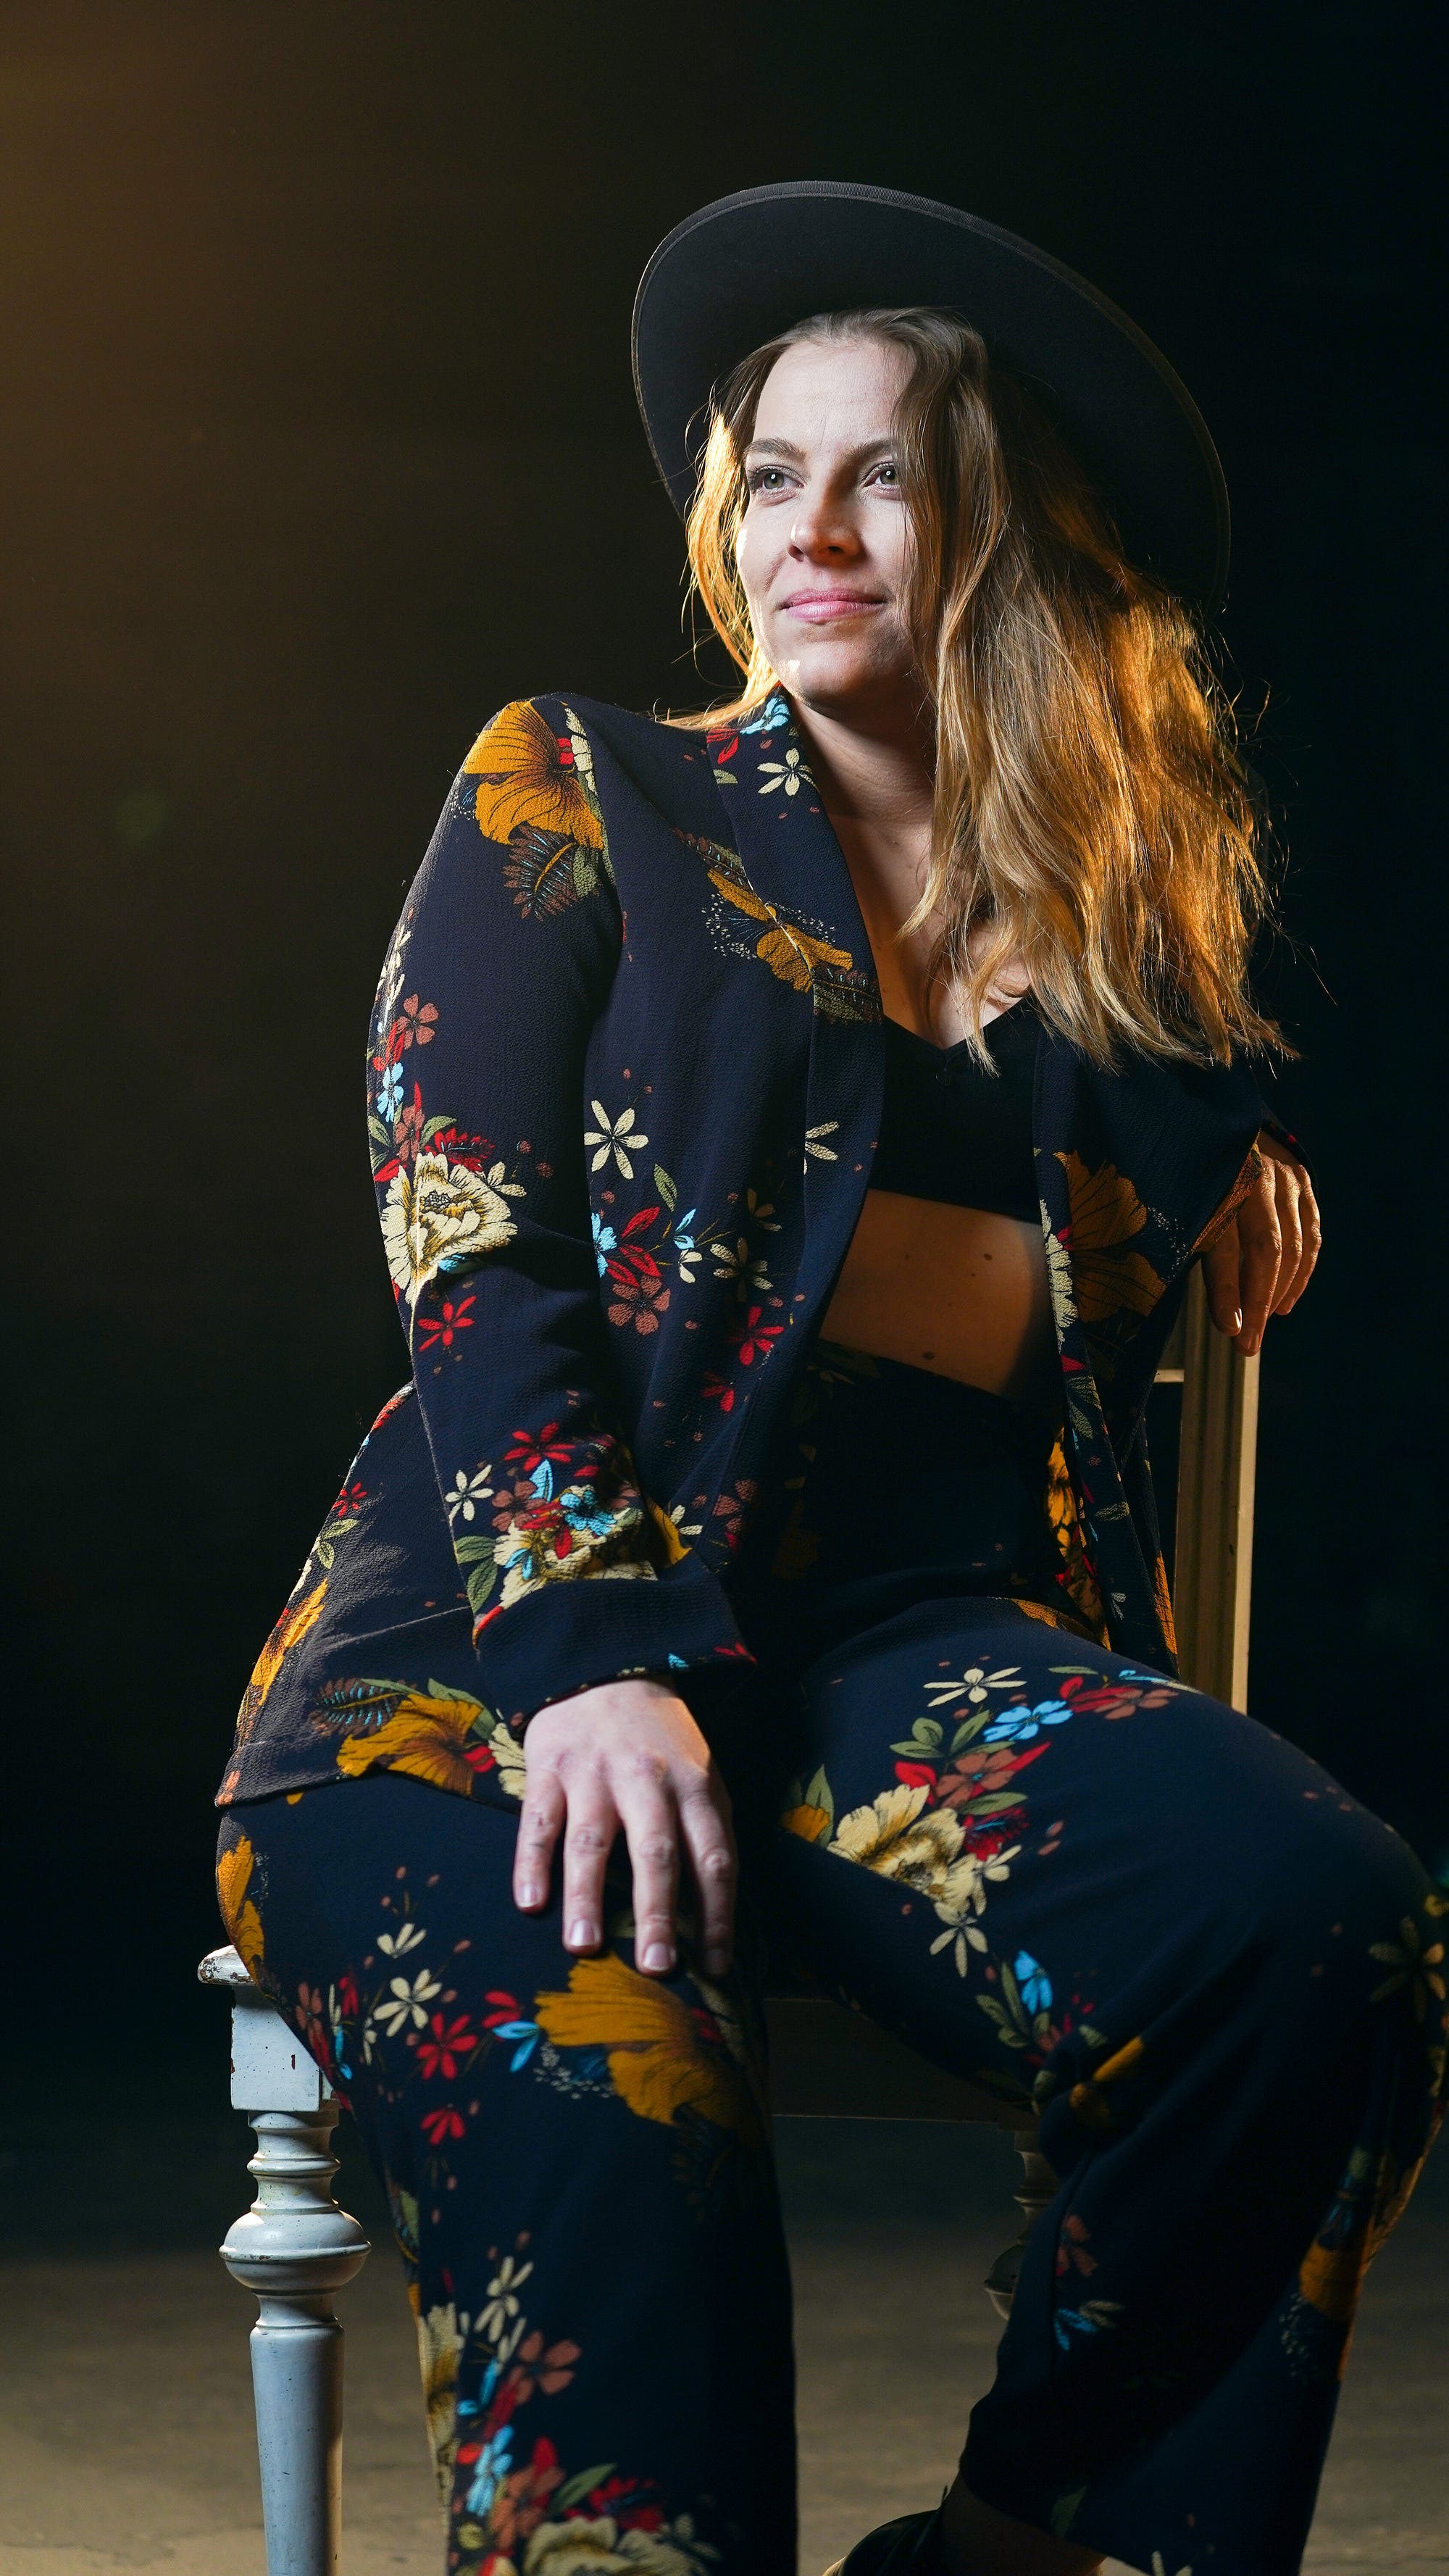 Rising Music Star Hanne Kah On The Five Things You Need To Shine In The  Music Industry, by Elana Cohen, Authority Magazine